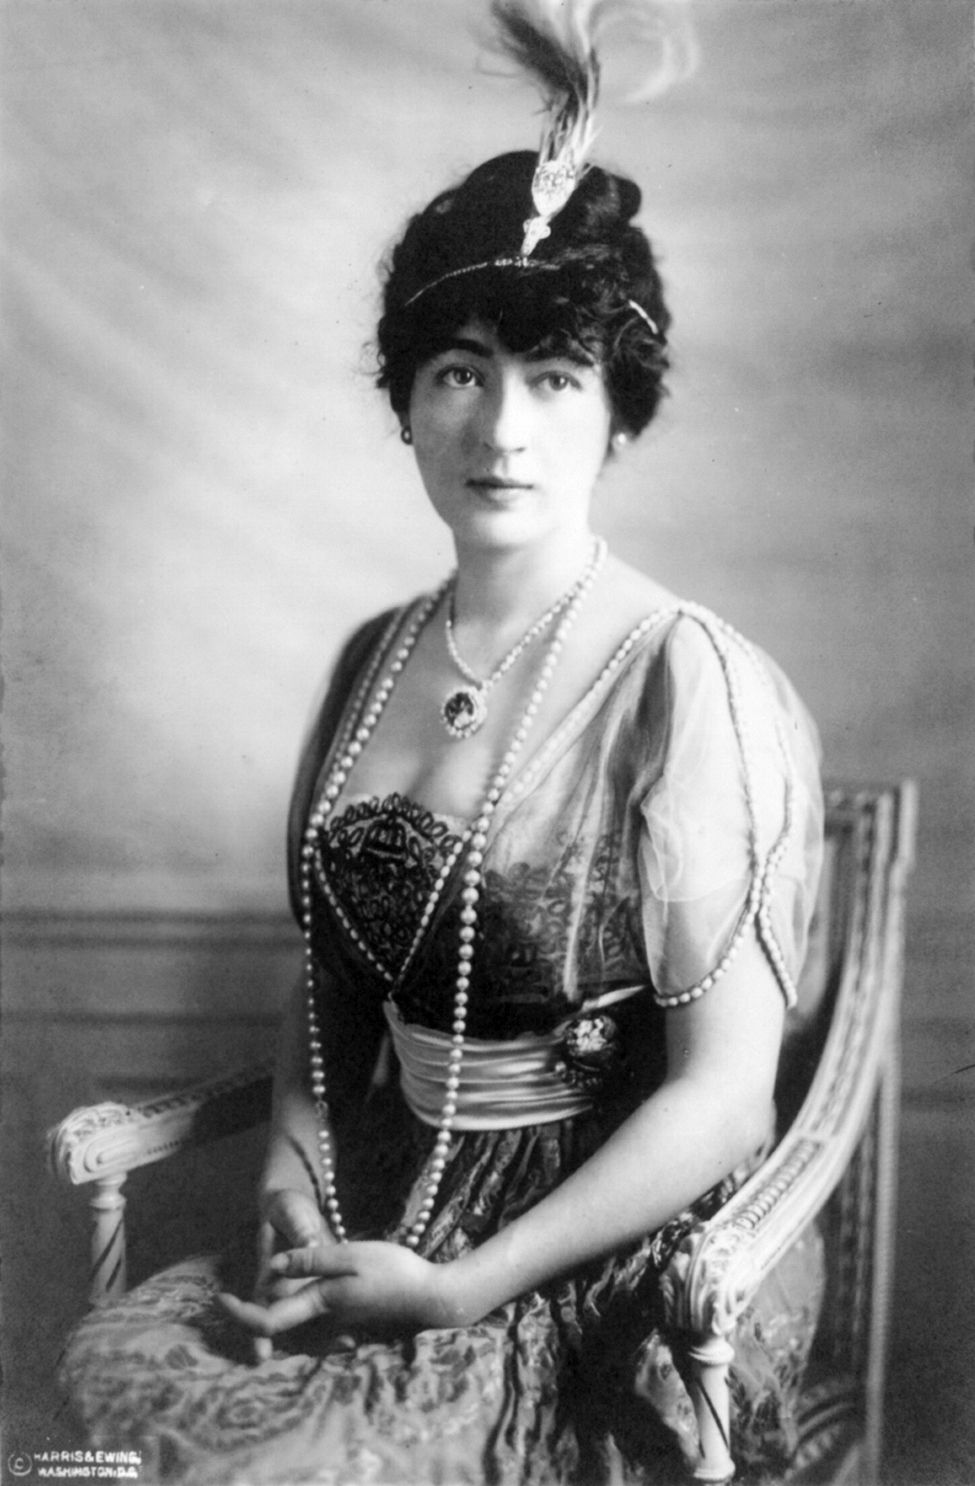 Socialite Evalyn Walsh McLean (her father discovered a gold mine) wearing an aigrette (and the Hope Diamond), 1912